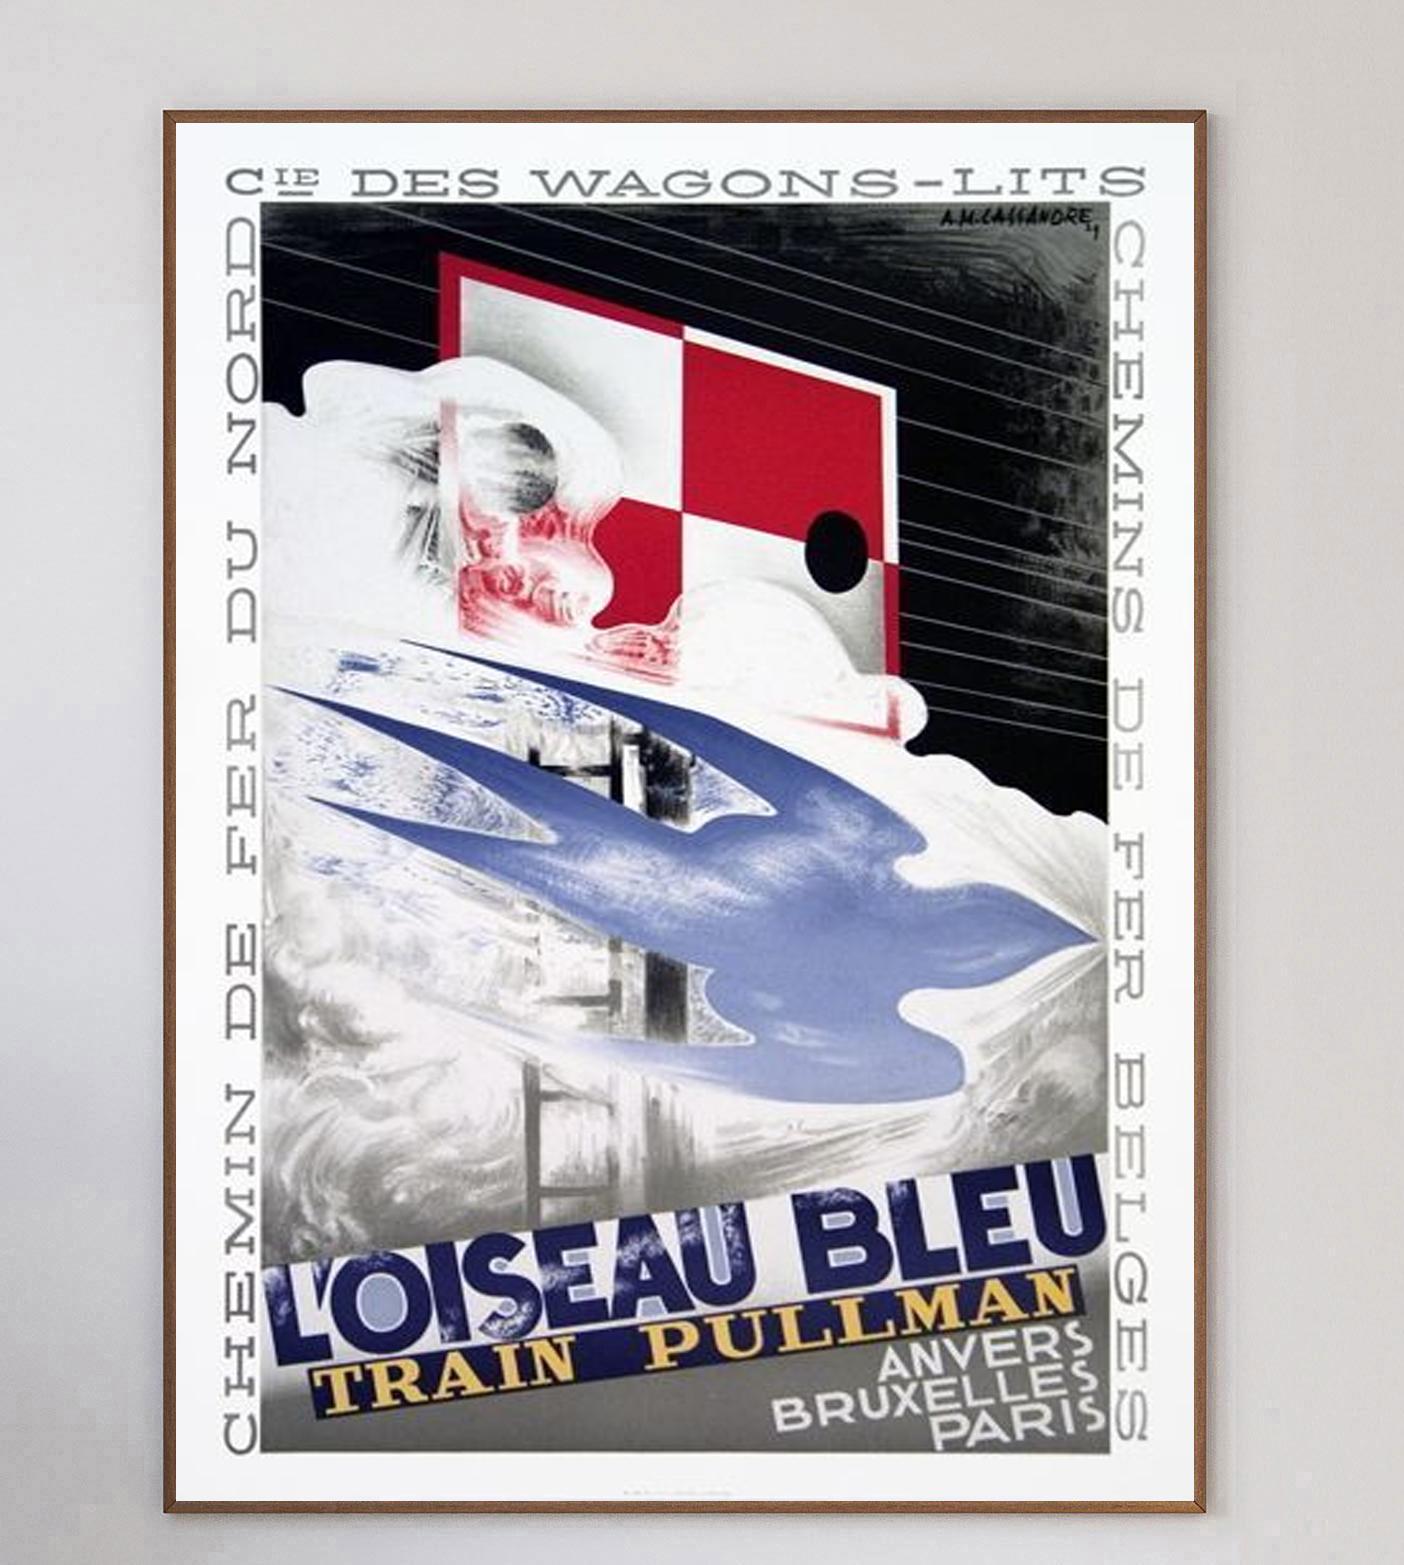 Incredible art deco advertisement poster for L'ouisea Bleu Train Pullman, a steam train that travelled from Antwerp to Brussells to Paris. With artwork from the iconic poster designer A.M. Cassandre, the piece was originally created for promotion of